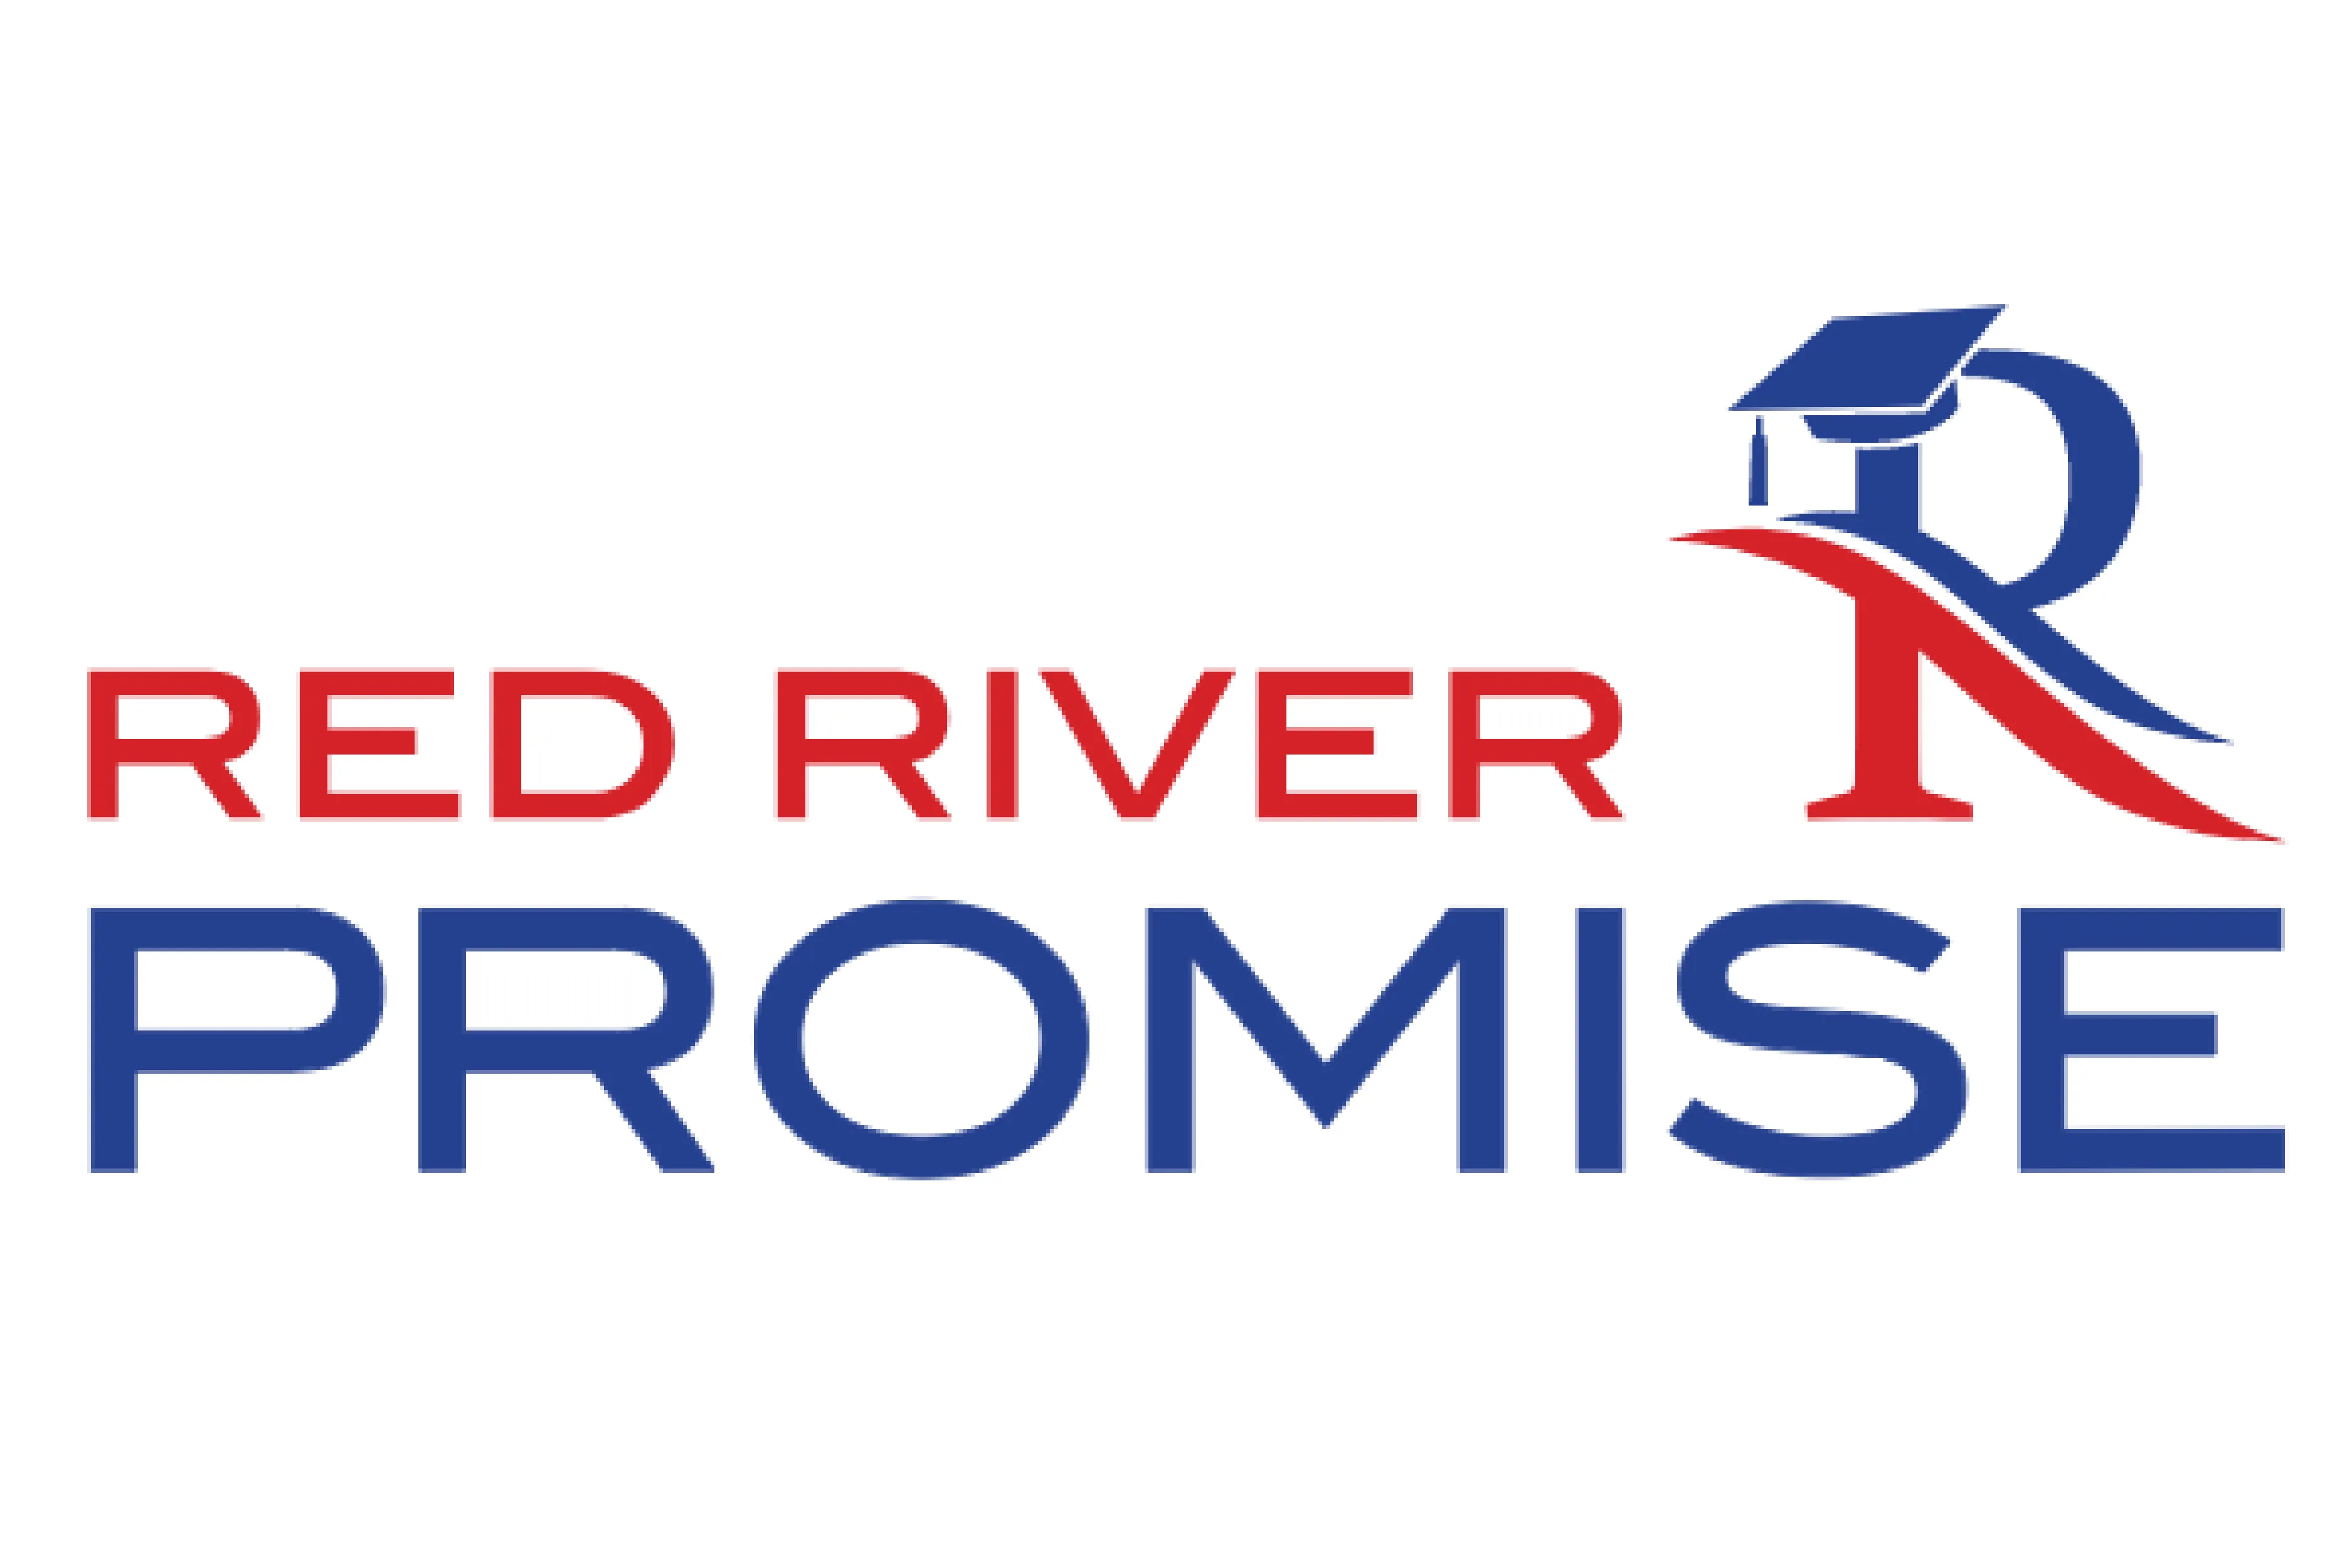 Red River Promise logo